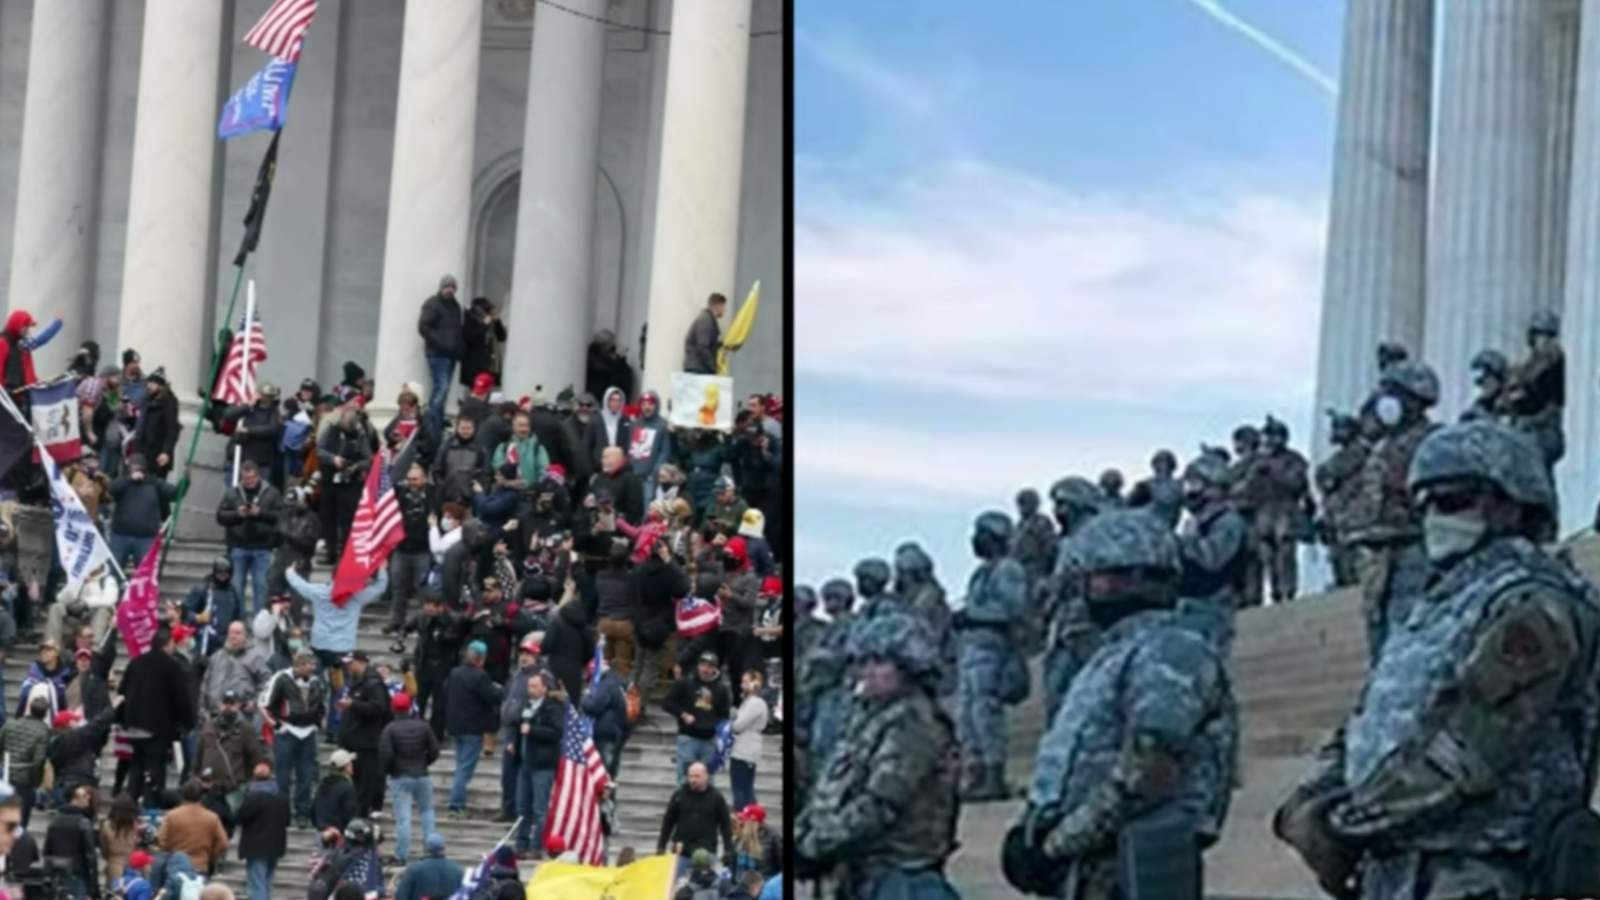 Michigan leaders condemn ‘double standard’ of treatment of mostly white rioters at US Capitol